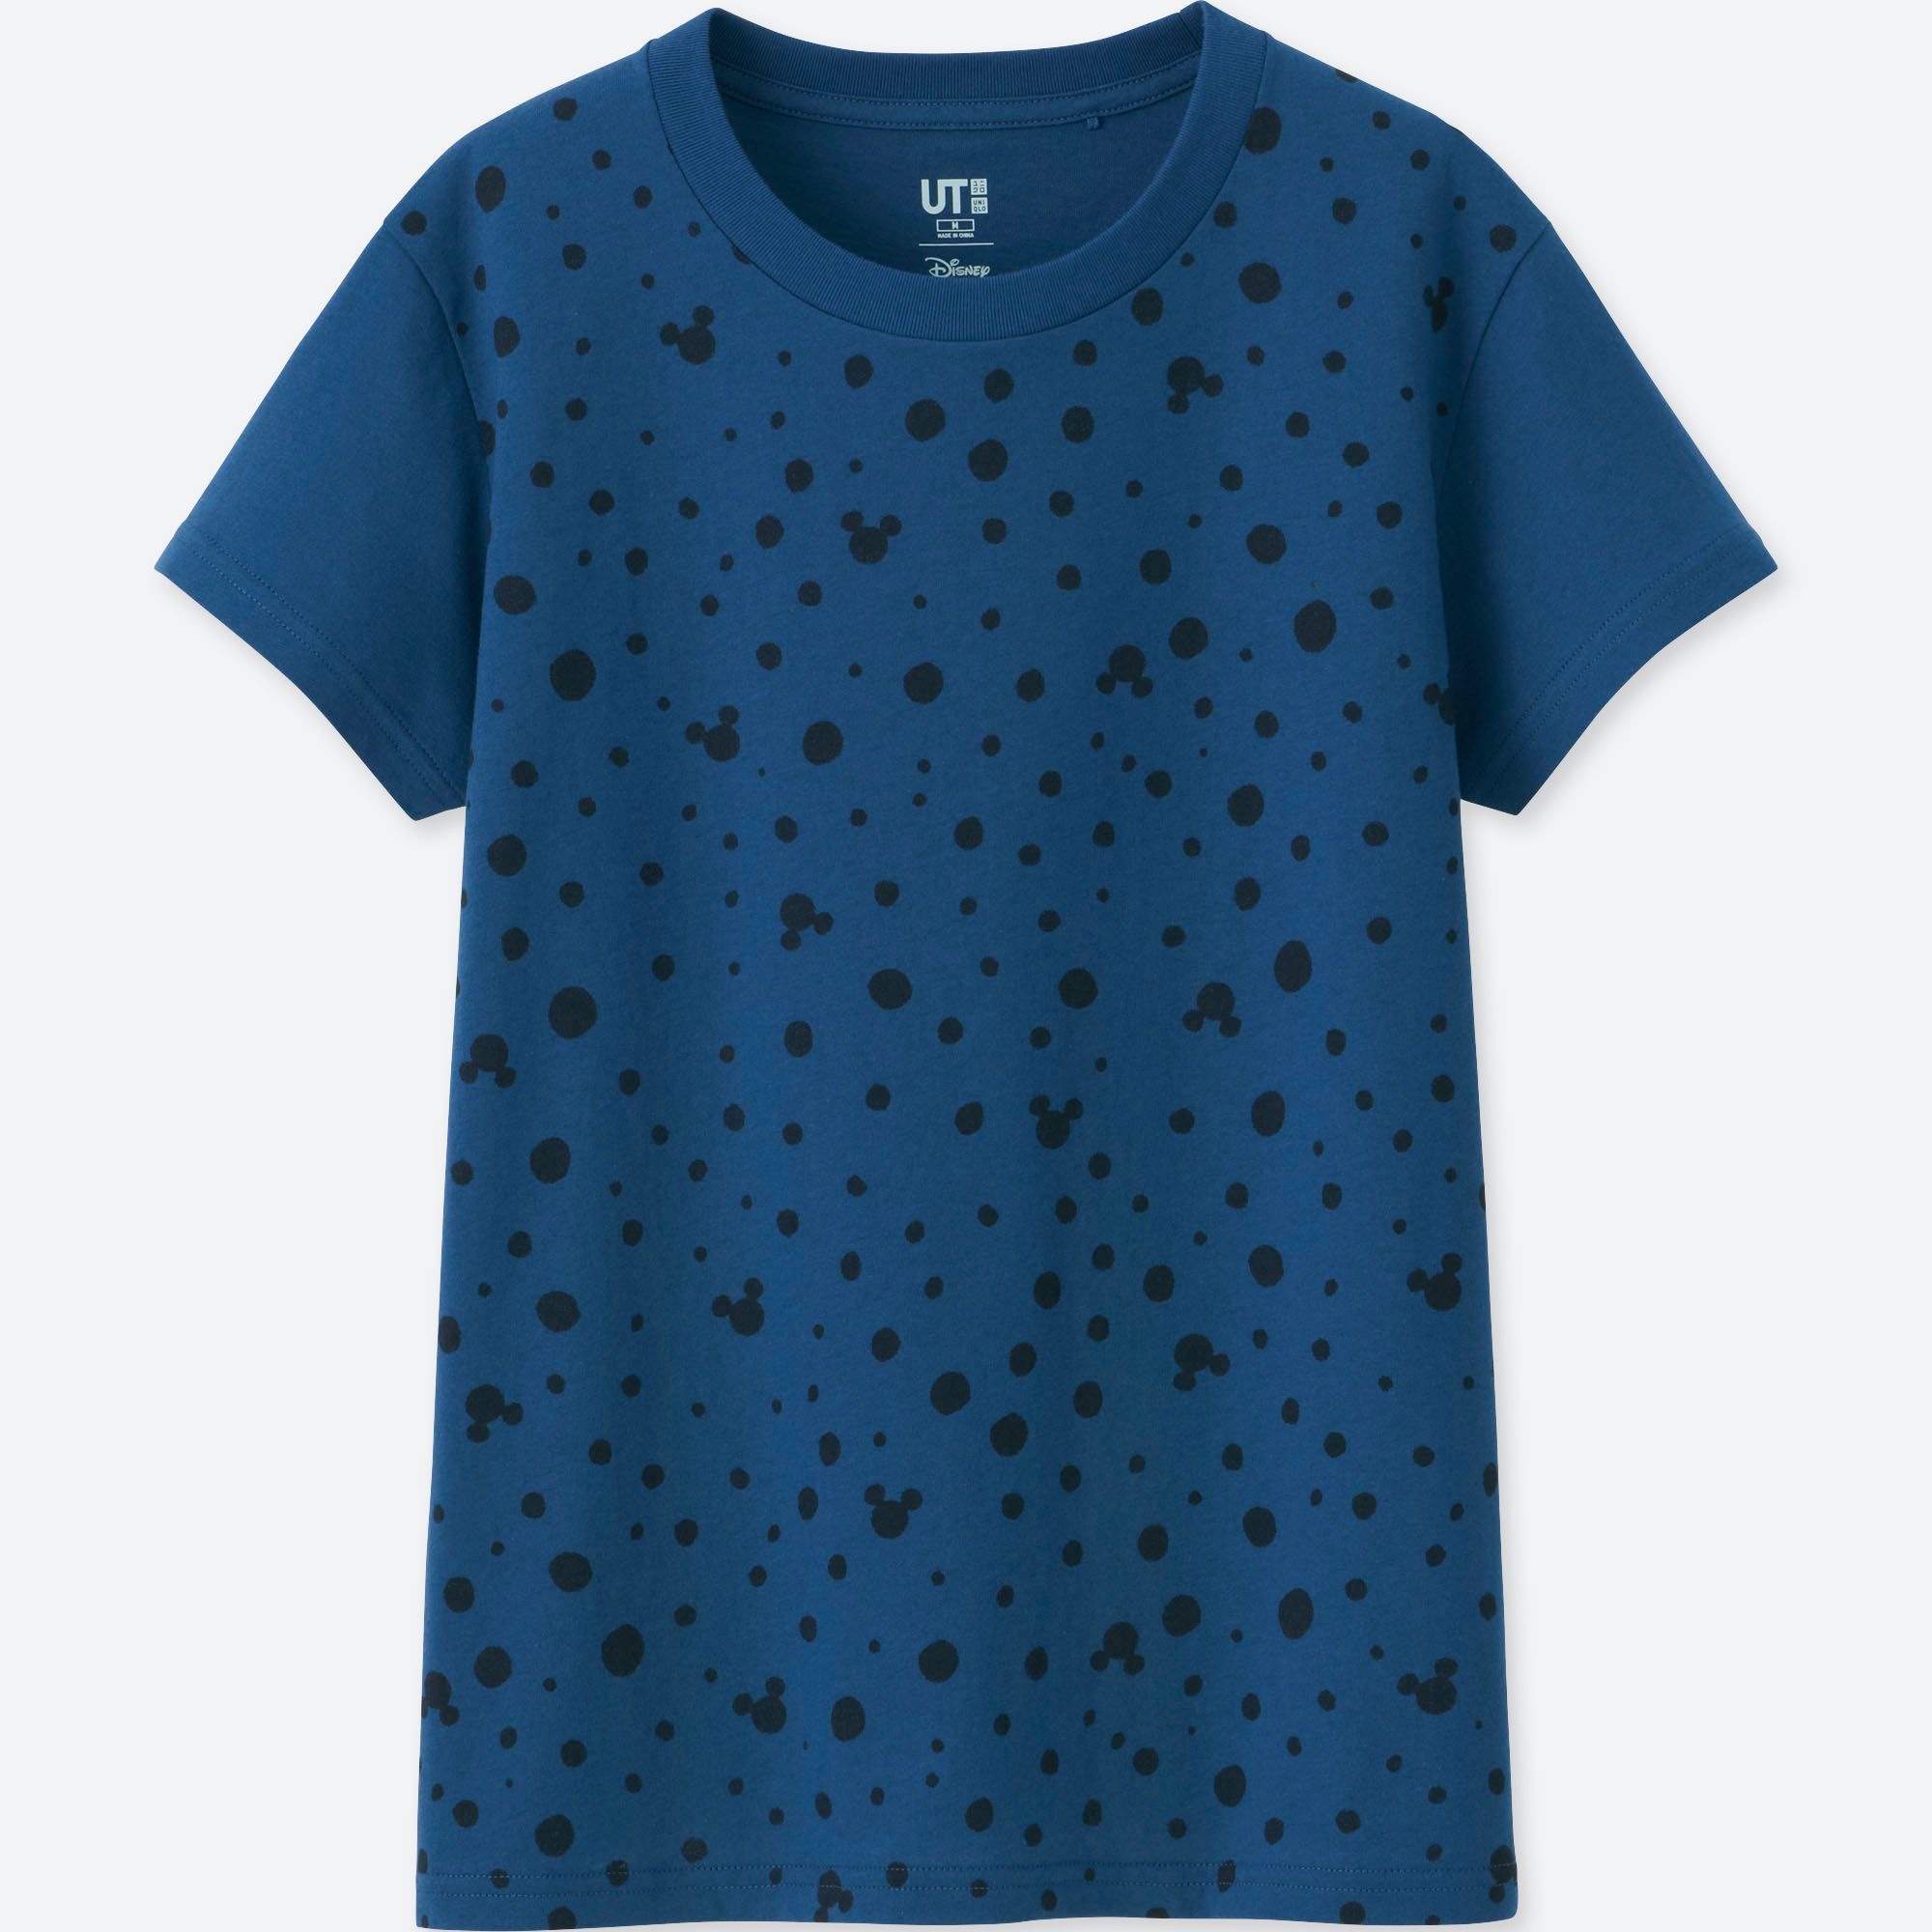 UNIQLO's New Mickey Blue Line Is Ideal for Warm Summer Afternoons